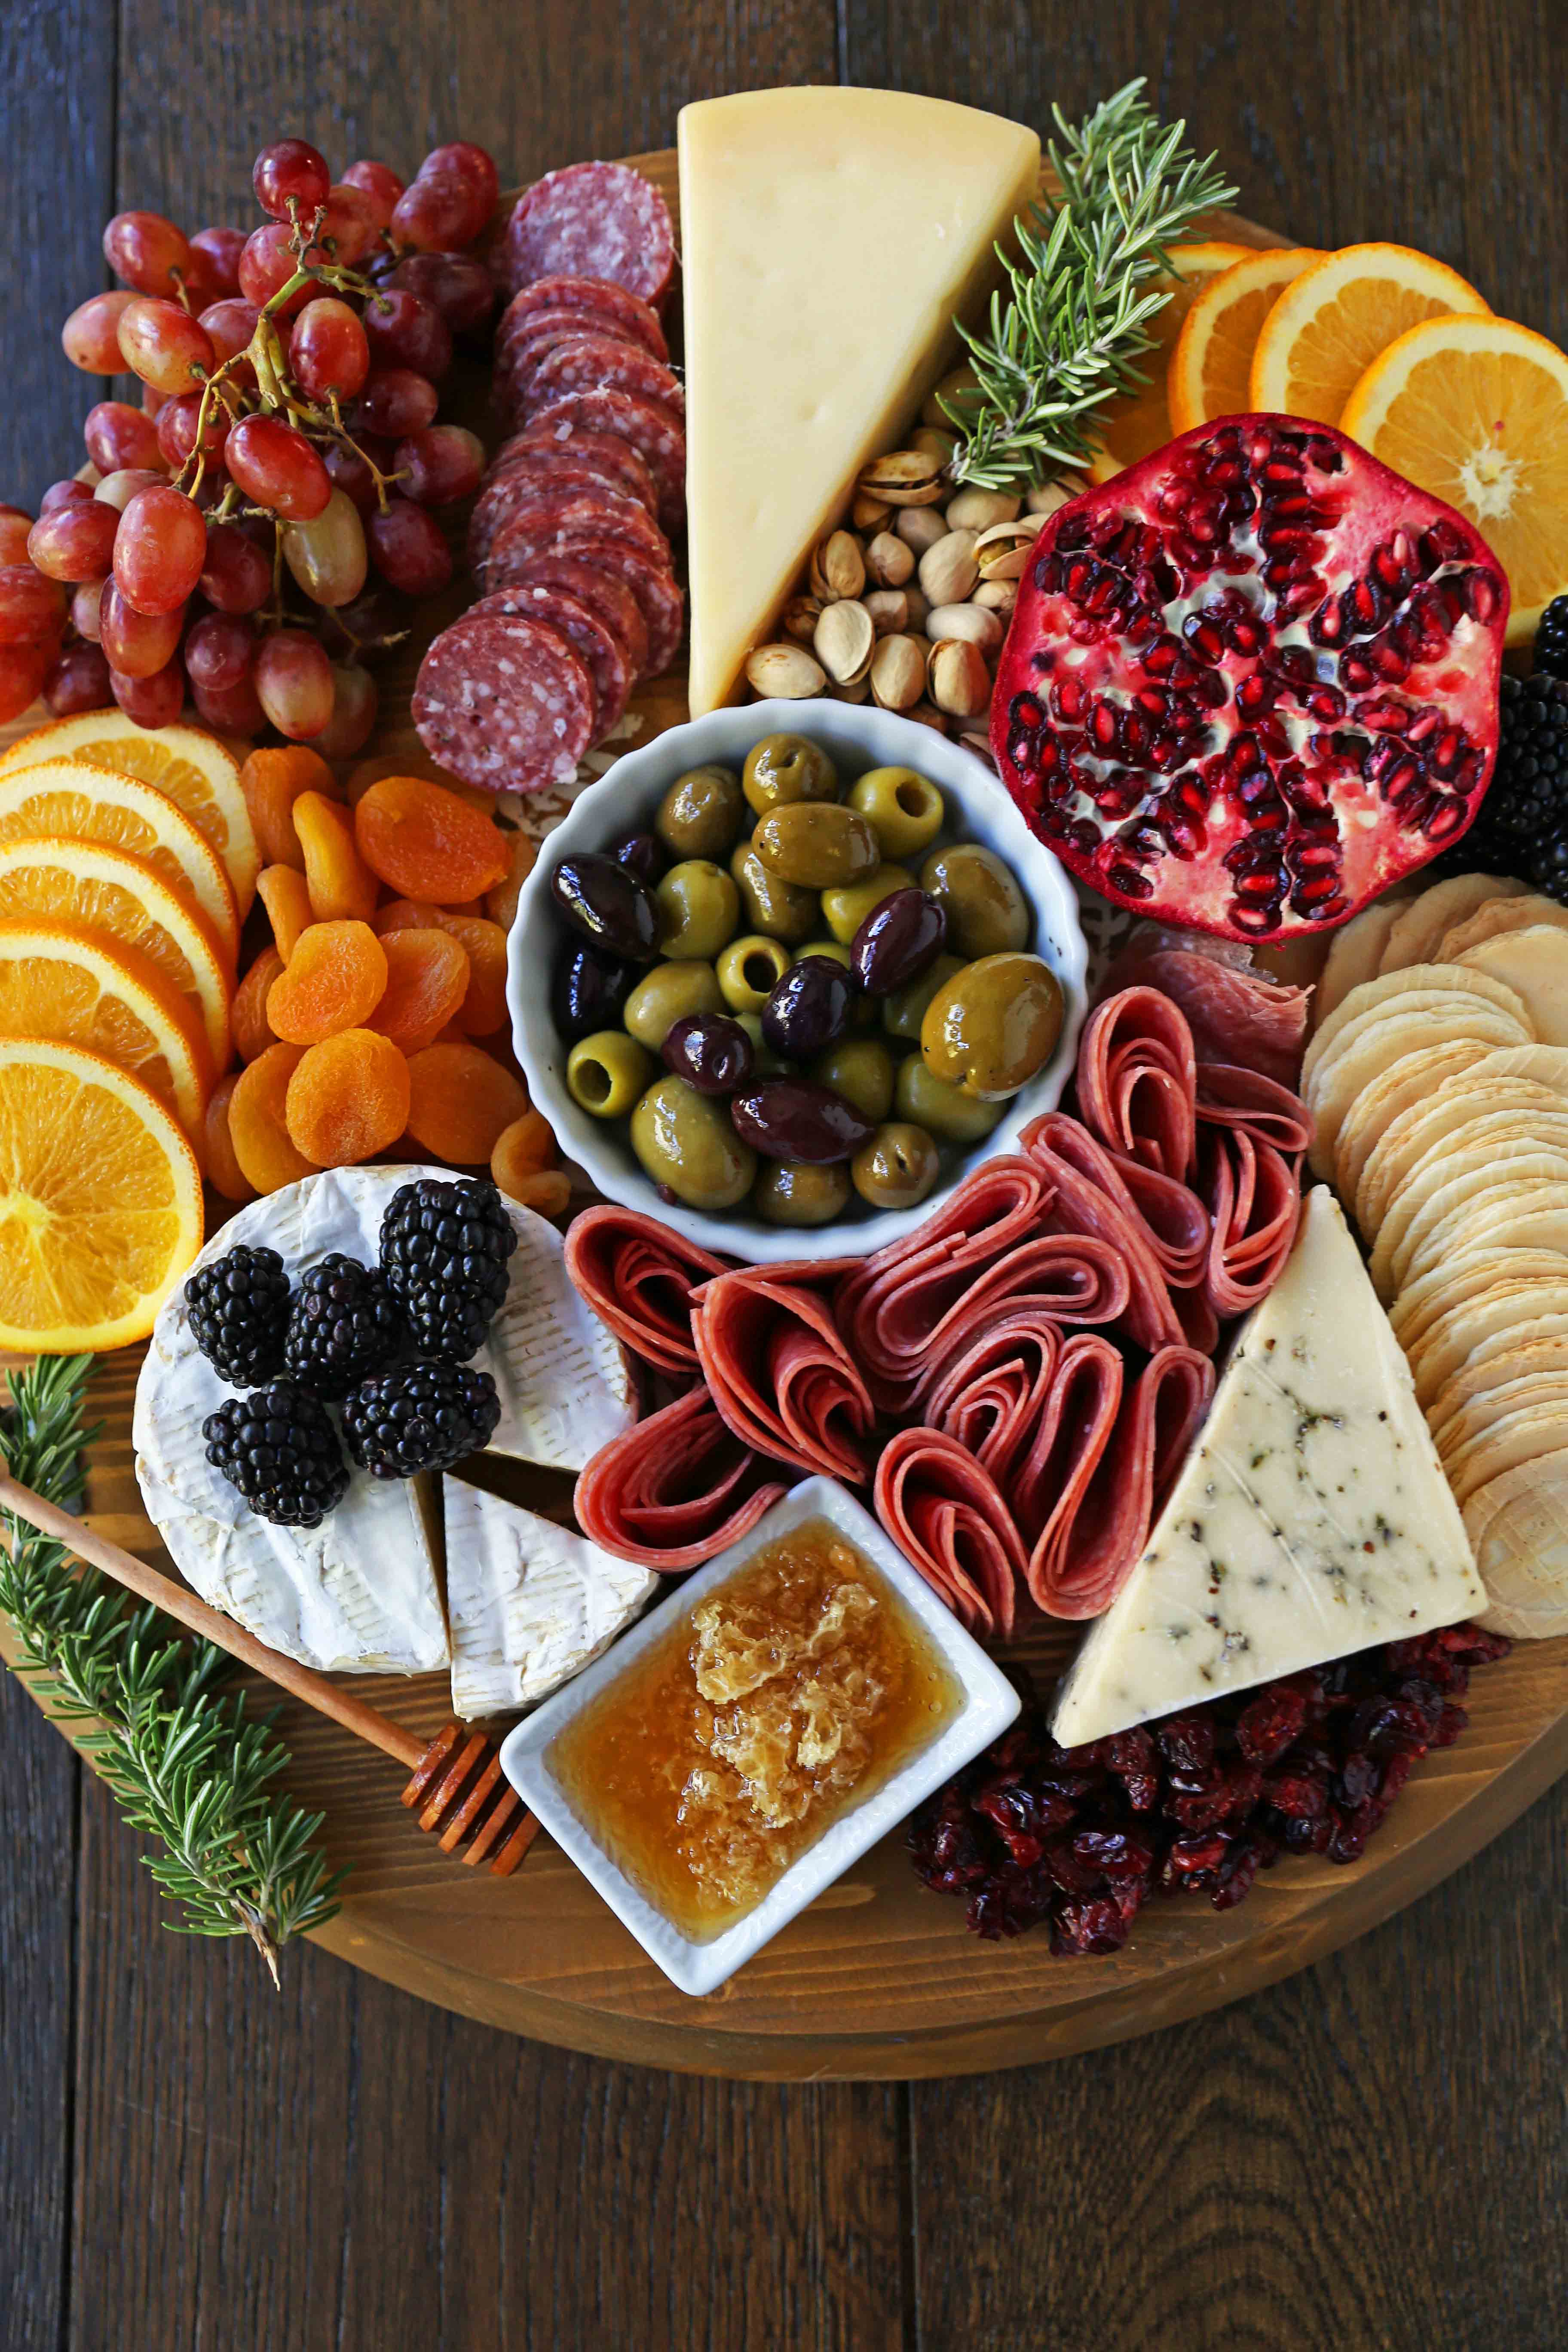 Make an Epic Cheese Board - Easy Appetizers